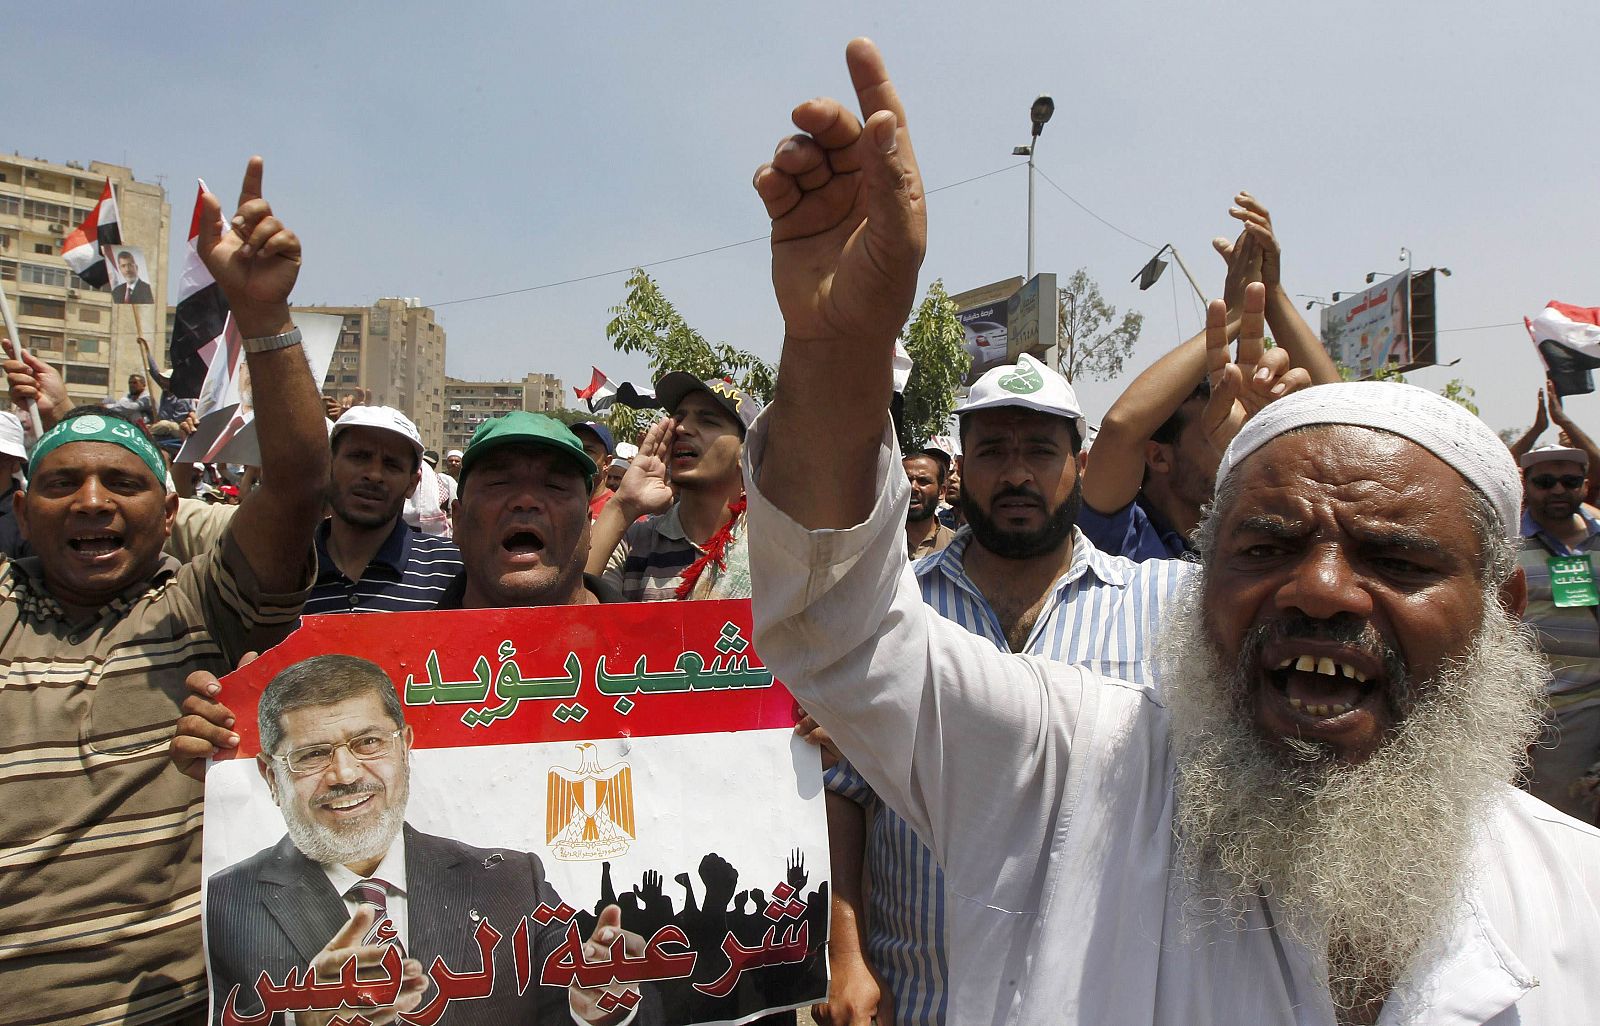 Members of the Muslim Brotherhood and supporters of ousted Egyptian President Mohamed Mursi shout slogans in Cairo